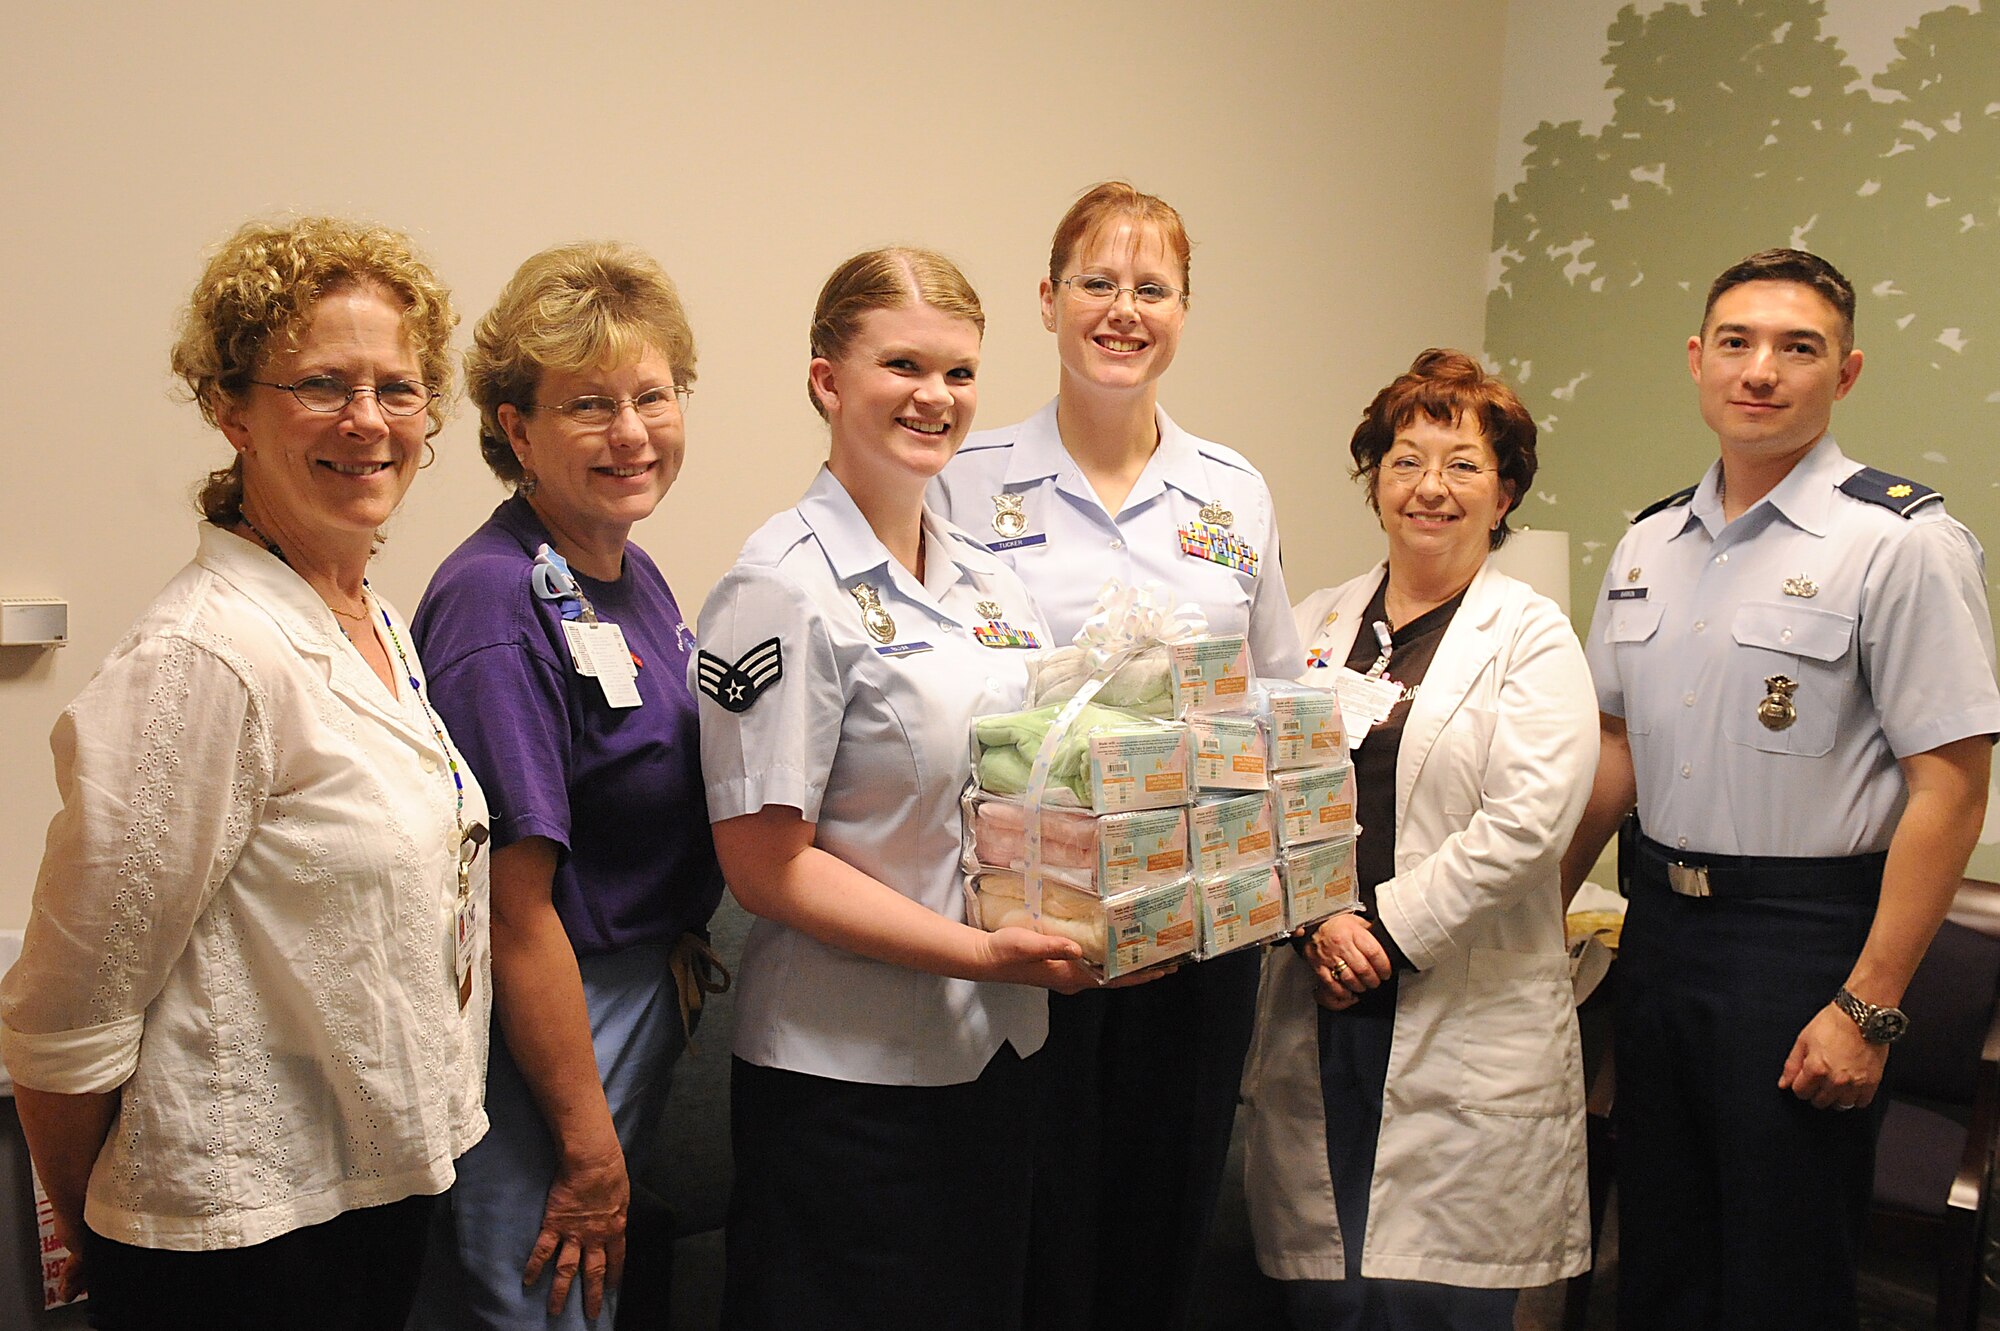 The 4th Security Forces Squadron pose with staff from the University of North Carolina Hospital in Chapel Hill, N.C. April 15, 2009. Squadron members donated 41 ergonomic pillows used to comfort premature babies in the hospital. The donation drive was held in memory of the daughter of Senior Airman Kerri Blum (3rd to the left), who died after 37 days of hospitalized care. (U.S. Air Force photo by Whitney S. Lambert)